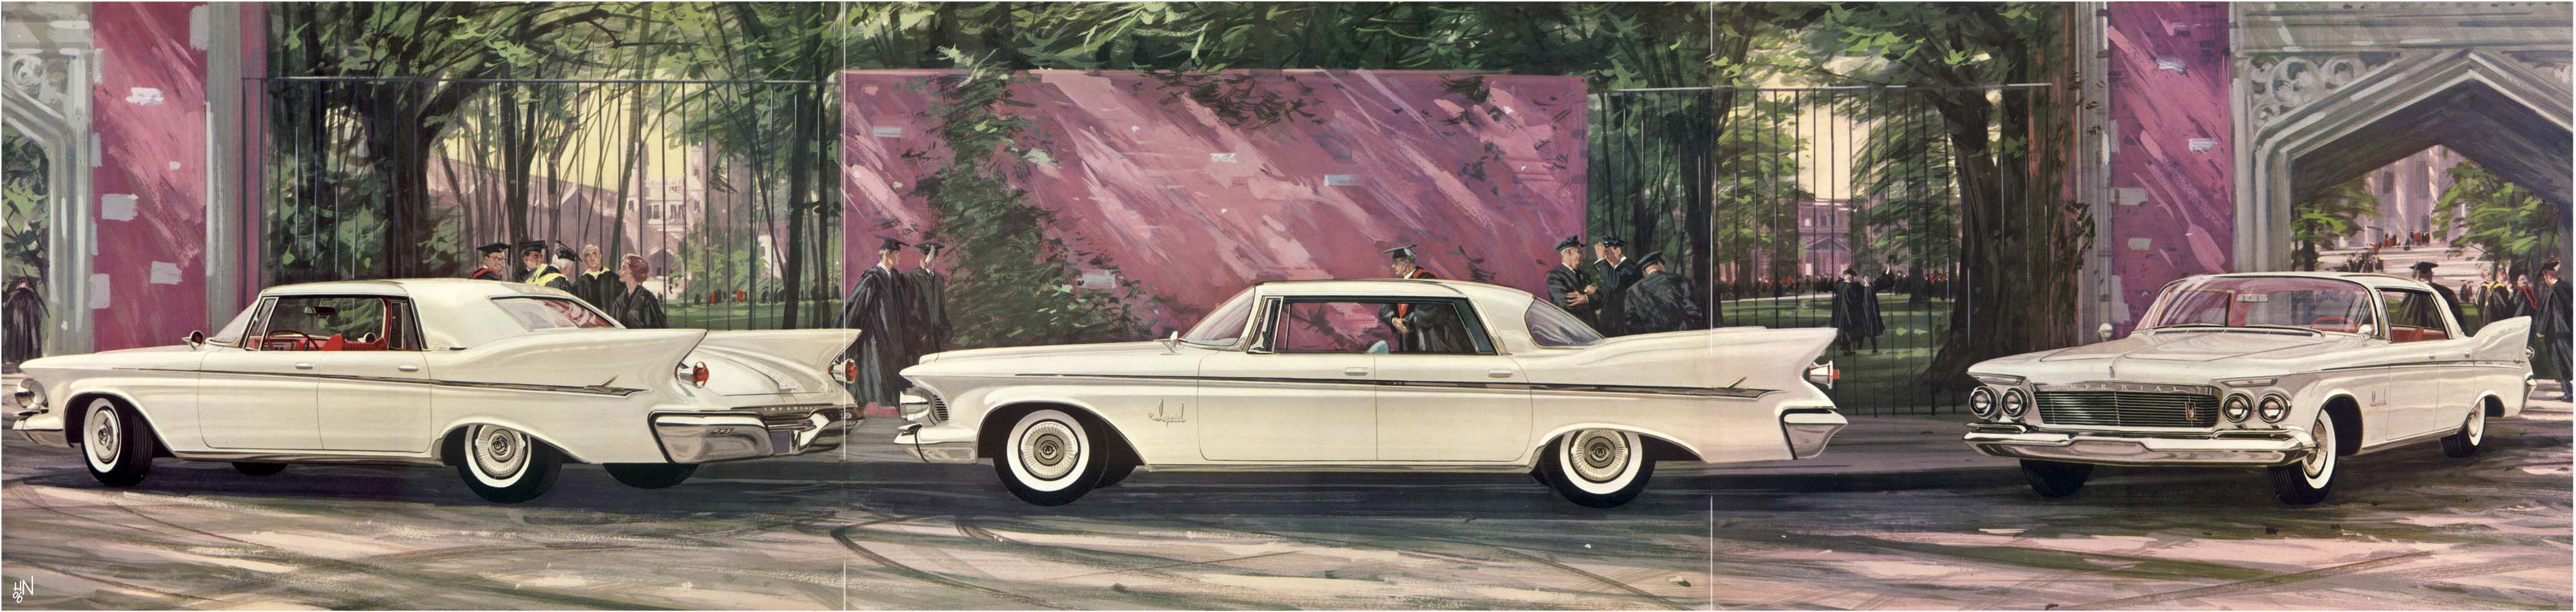 1961 Imperial-a03